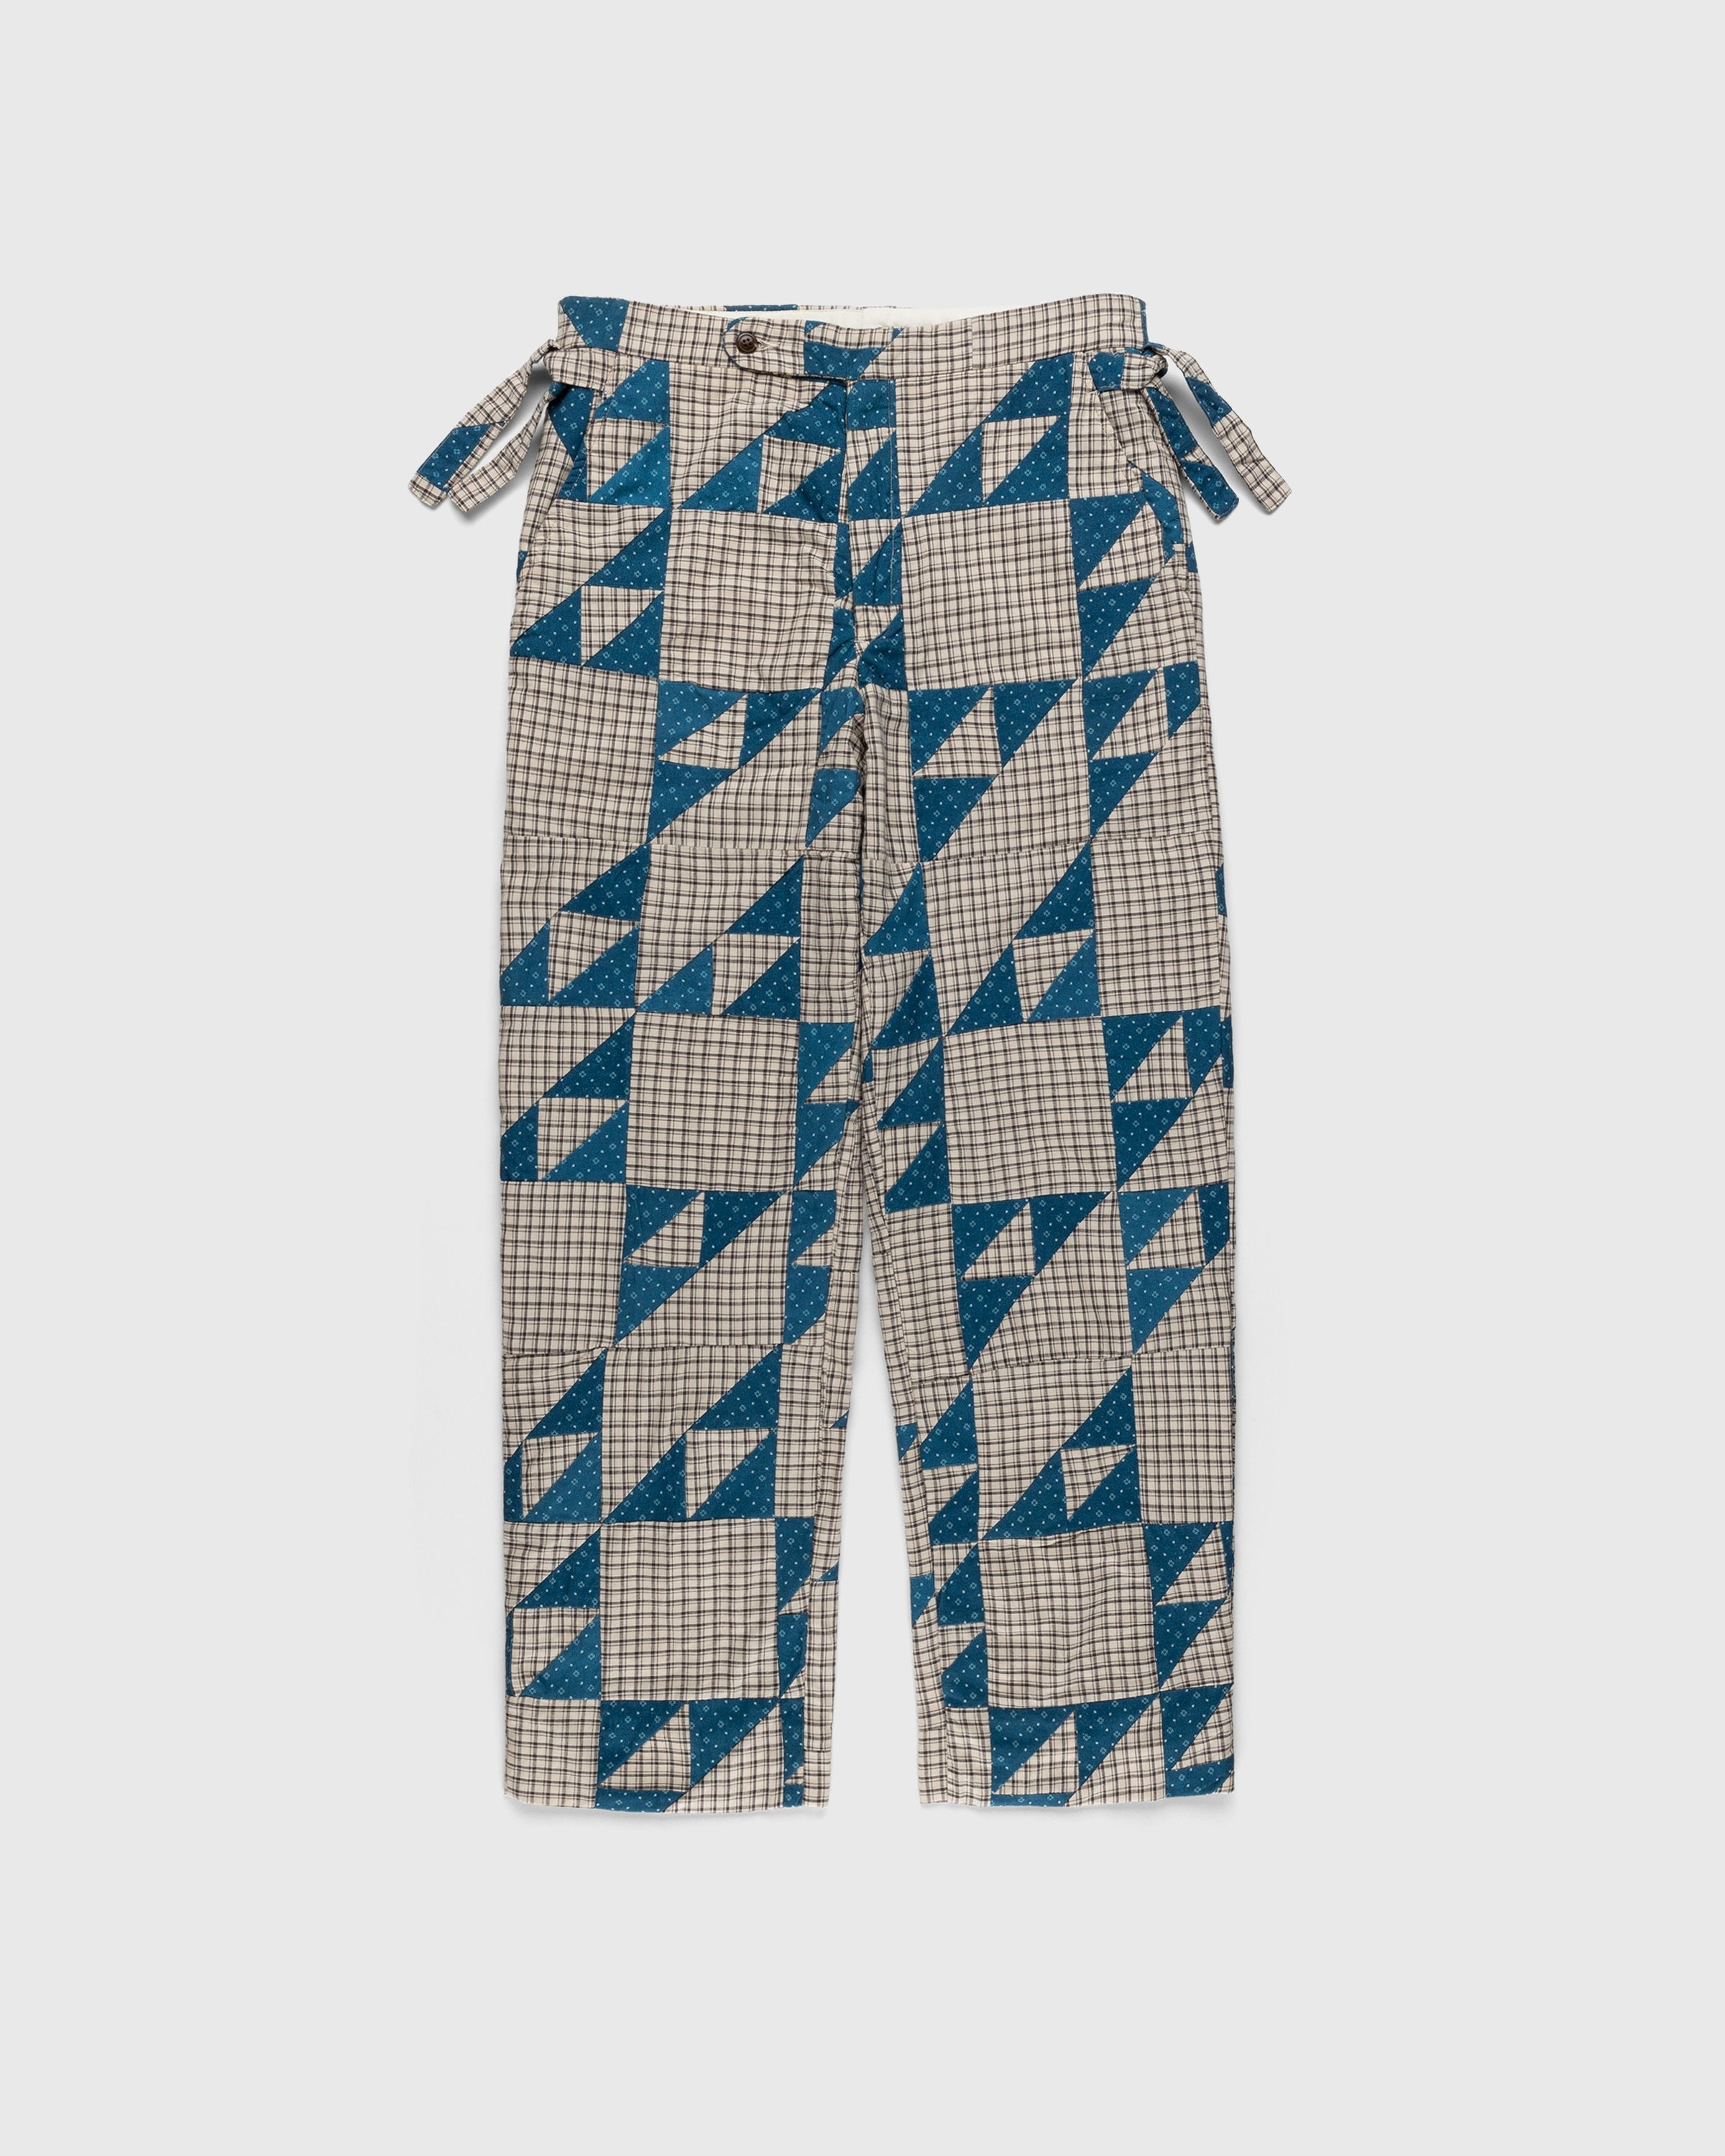 Bode – Wandering Lover Trousers Multi - Trousers - Multi - Image 1